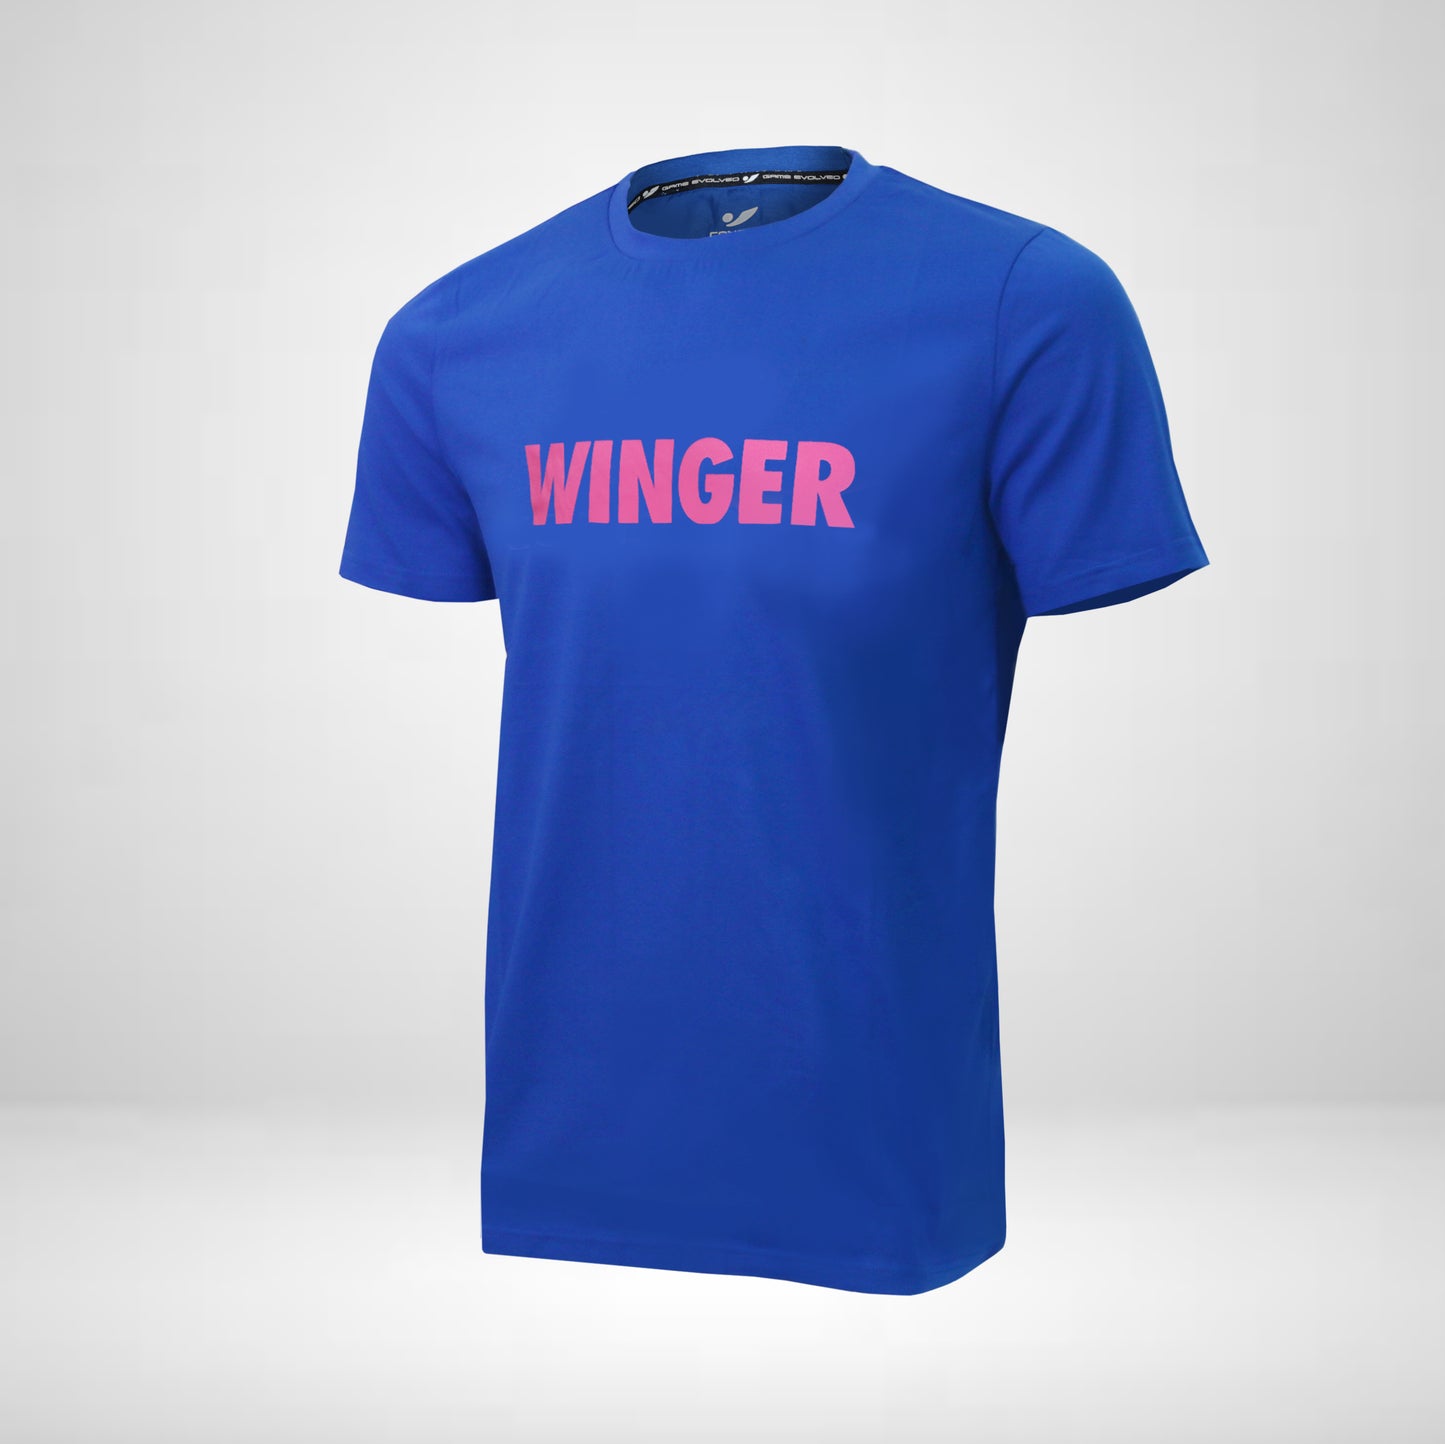 T-shirt Winger Concave Soccer Tee - Blue / Neon Pink